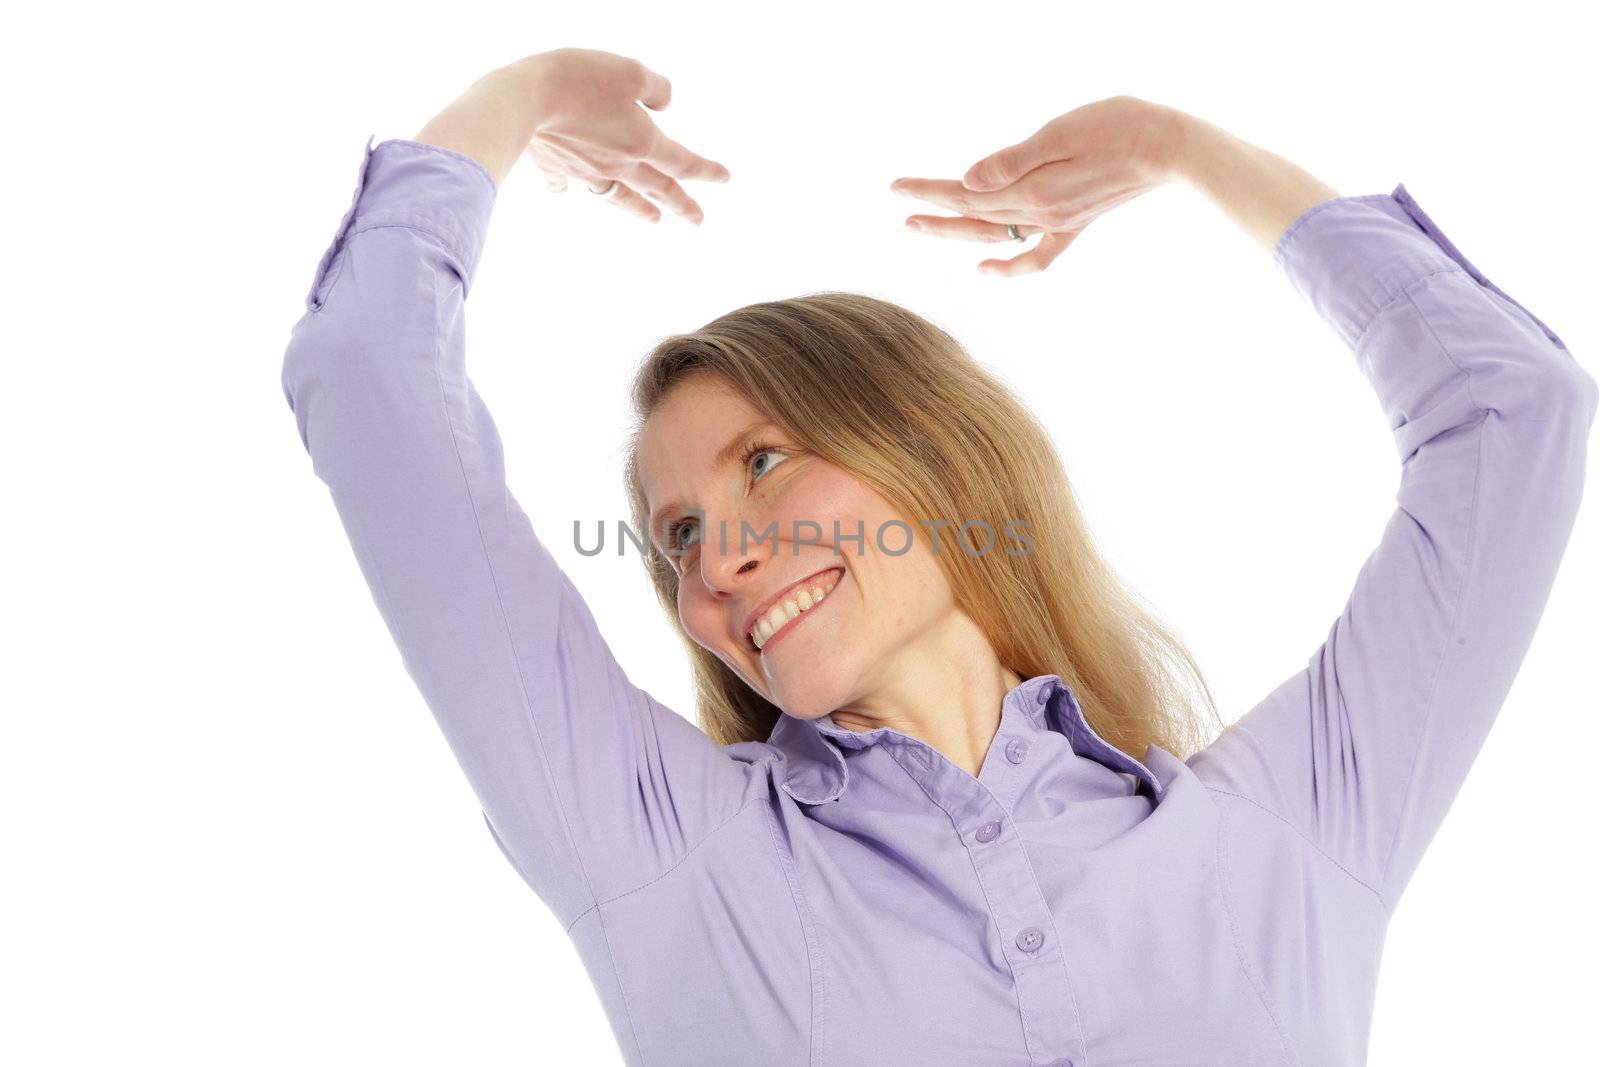 Smiling woman stretching raising her arms above her head as she relaxes and unwinds isolated on white